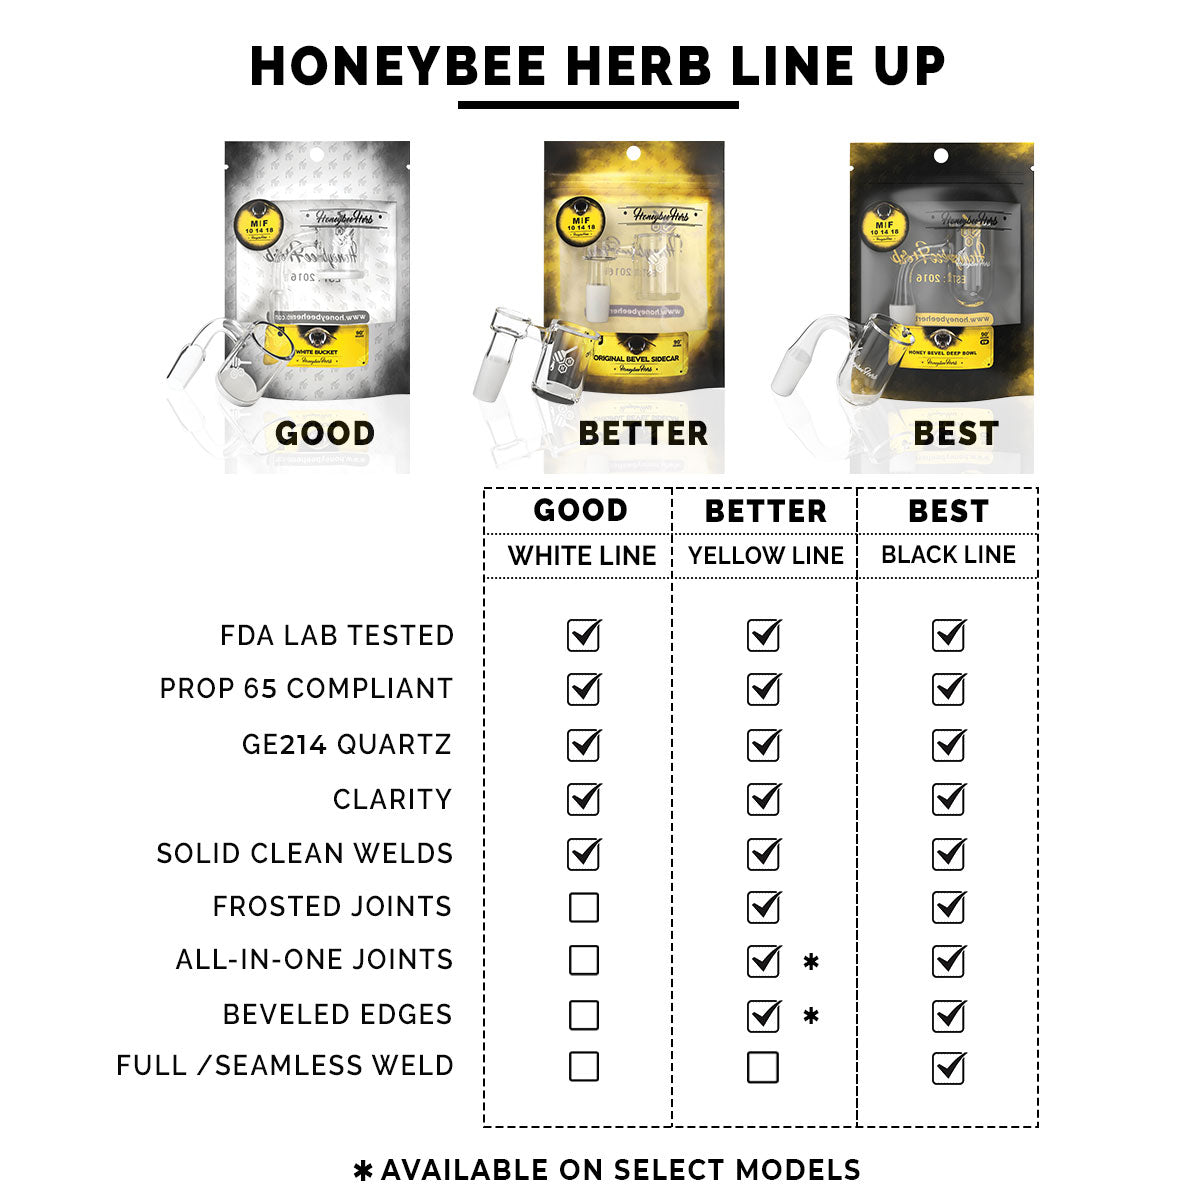 Honeybee Herb Quartz Bangers comparison chart, showcasing quality tiers with product features.